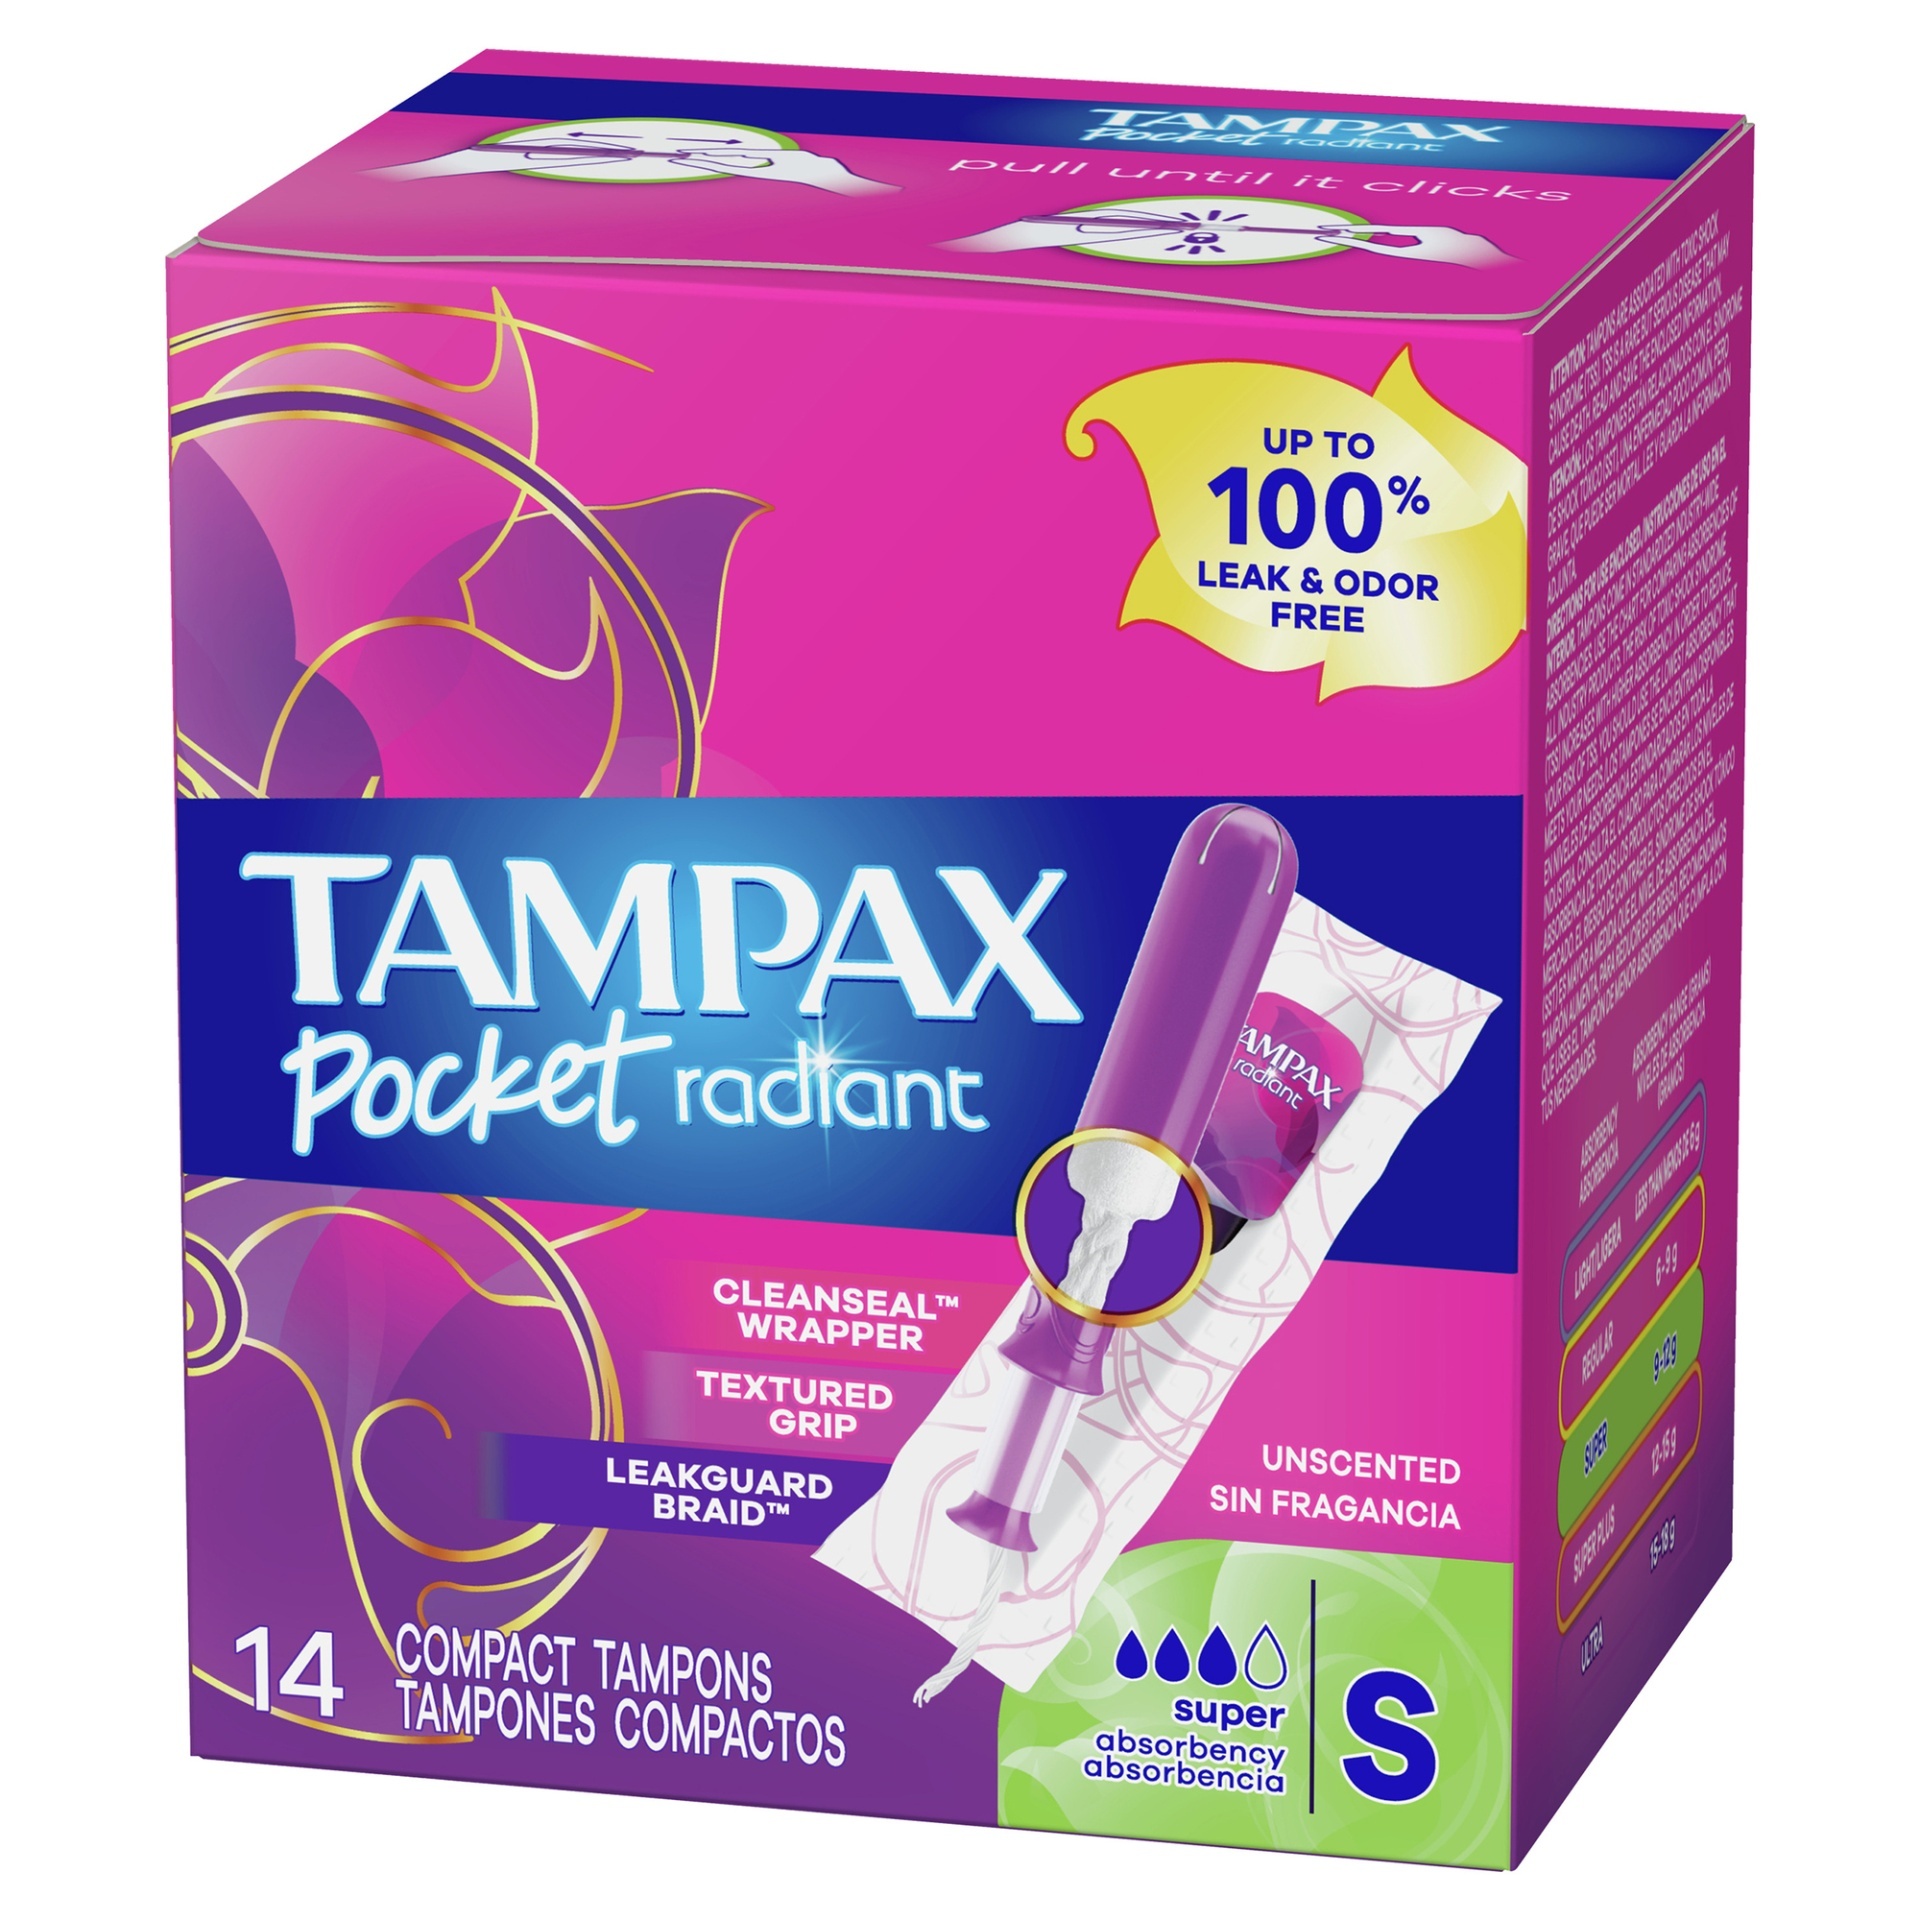 slide 1 of 1, Tampax Pocket Radiant Compact Plastic Tampons, With LeakGuard Braid, Super Absorbency, Unscented, 14 Count, 14 ct